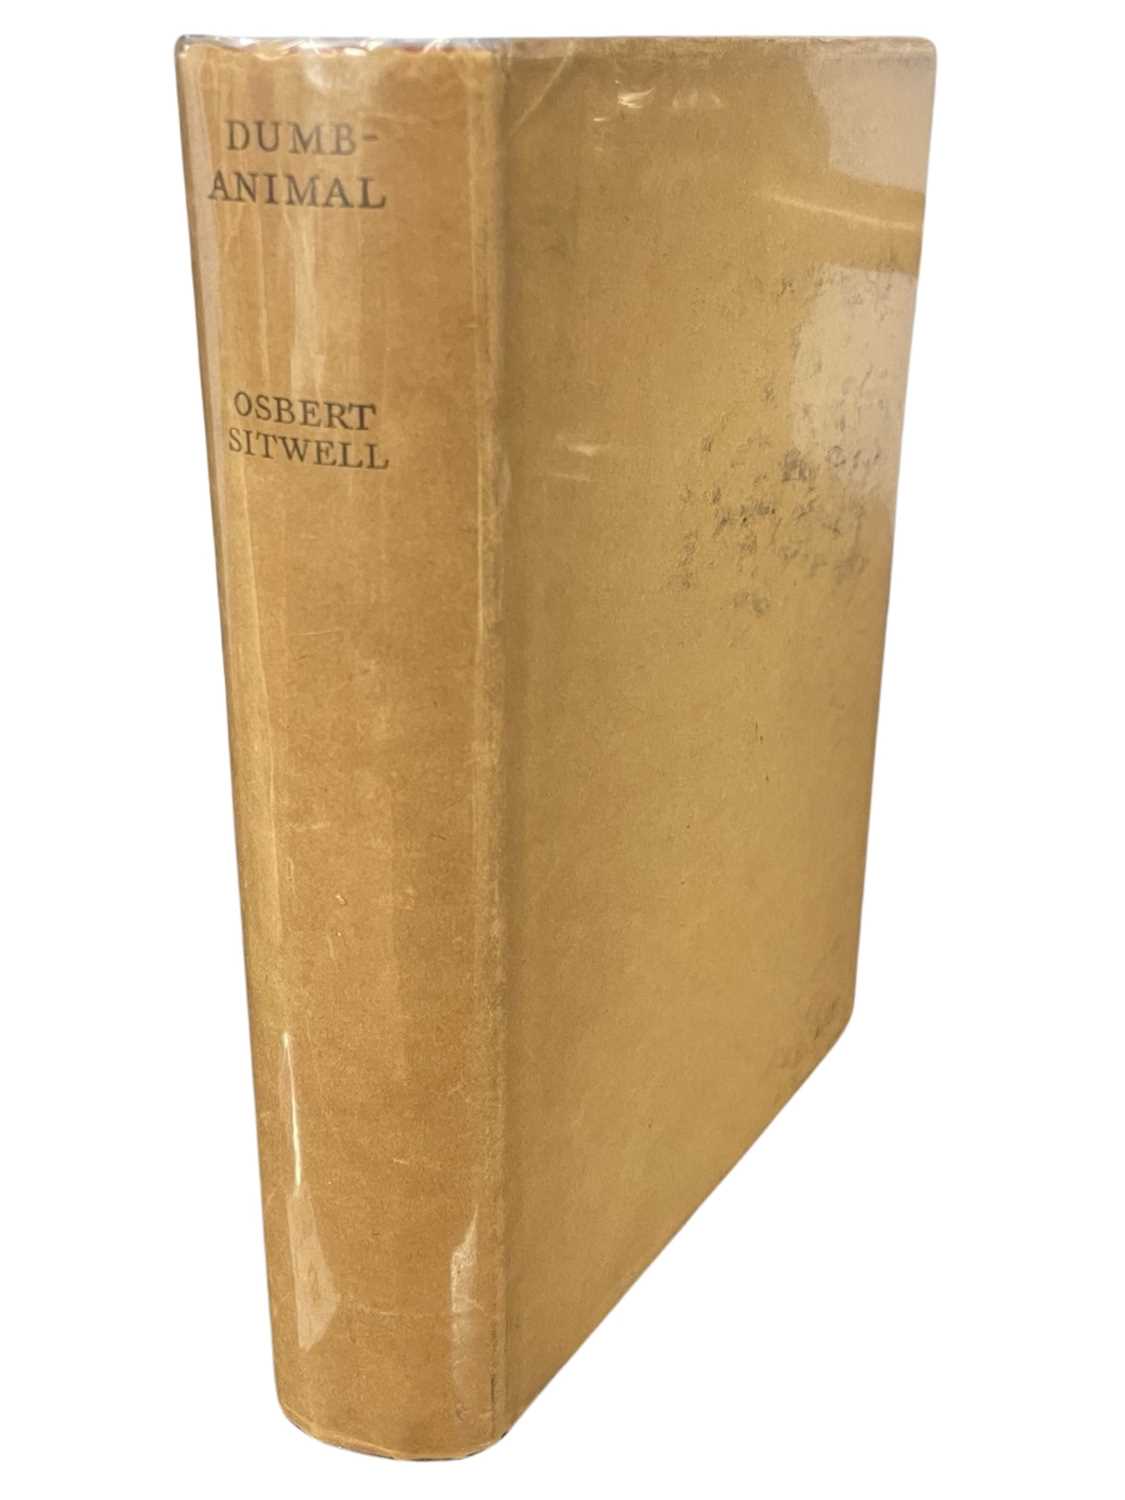 OSBERT SITWELL: DUMB-ANIMAL AND OTHER STORIES, London, Dickworth, 1930. Hand numbered and signed